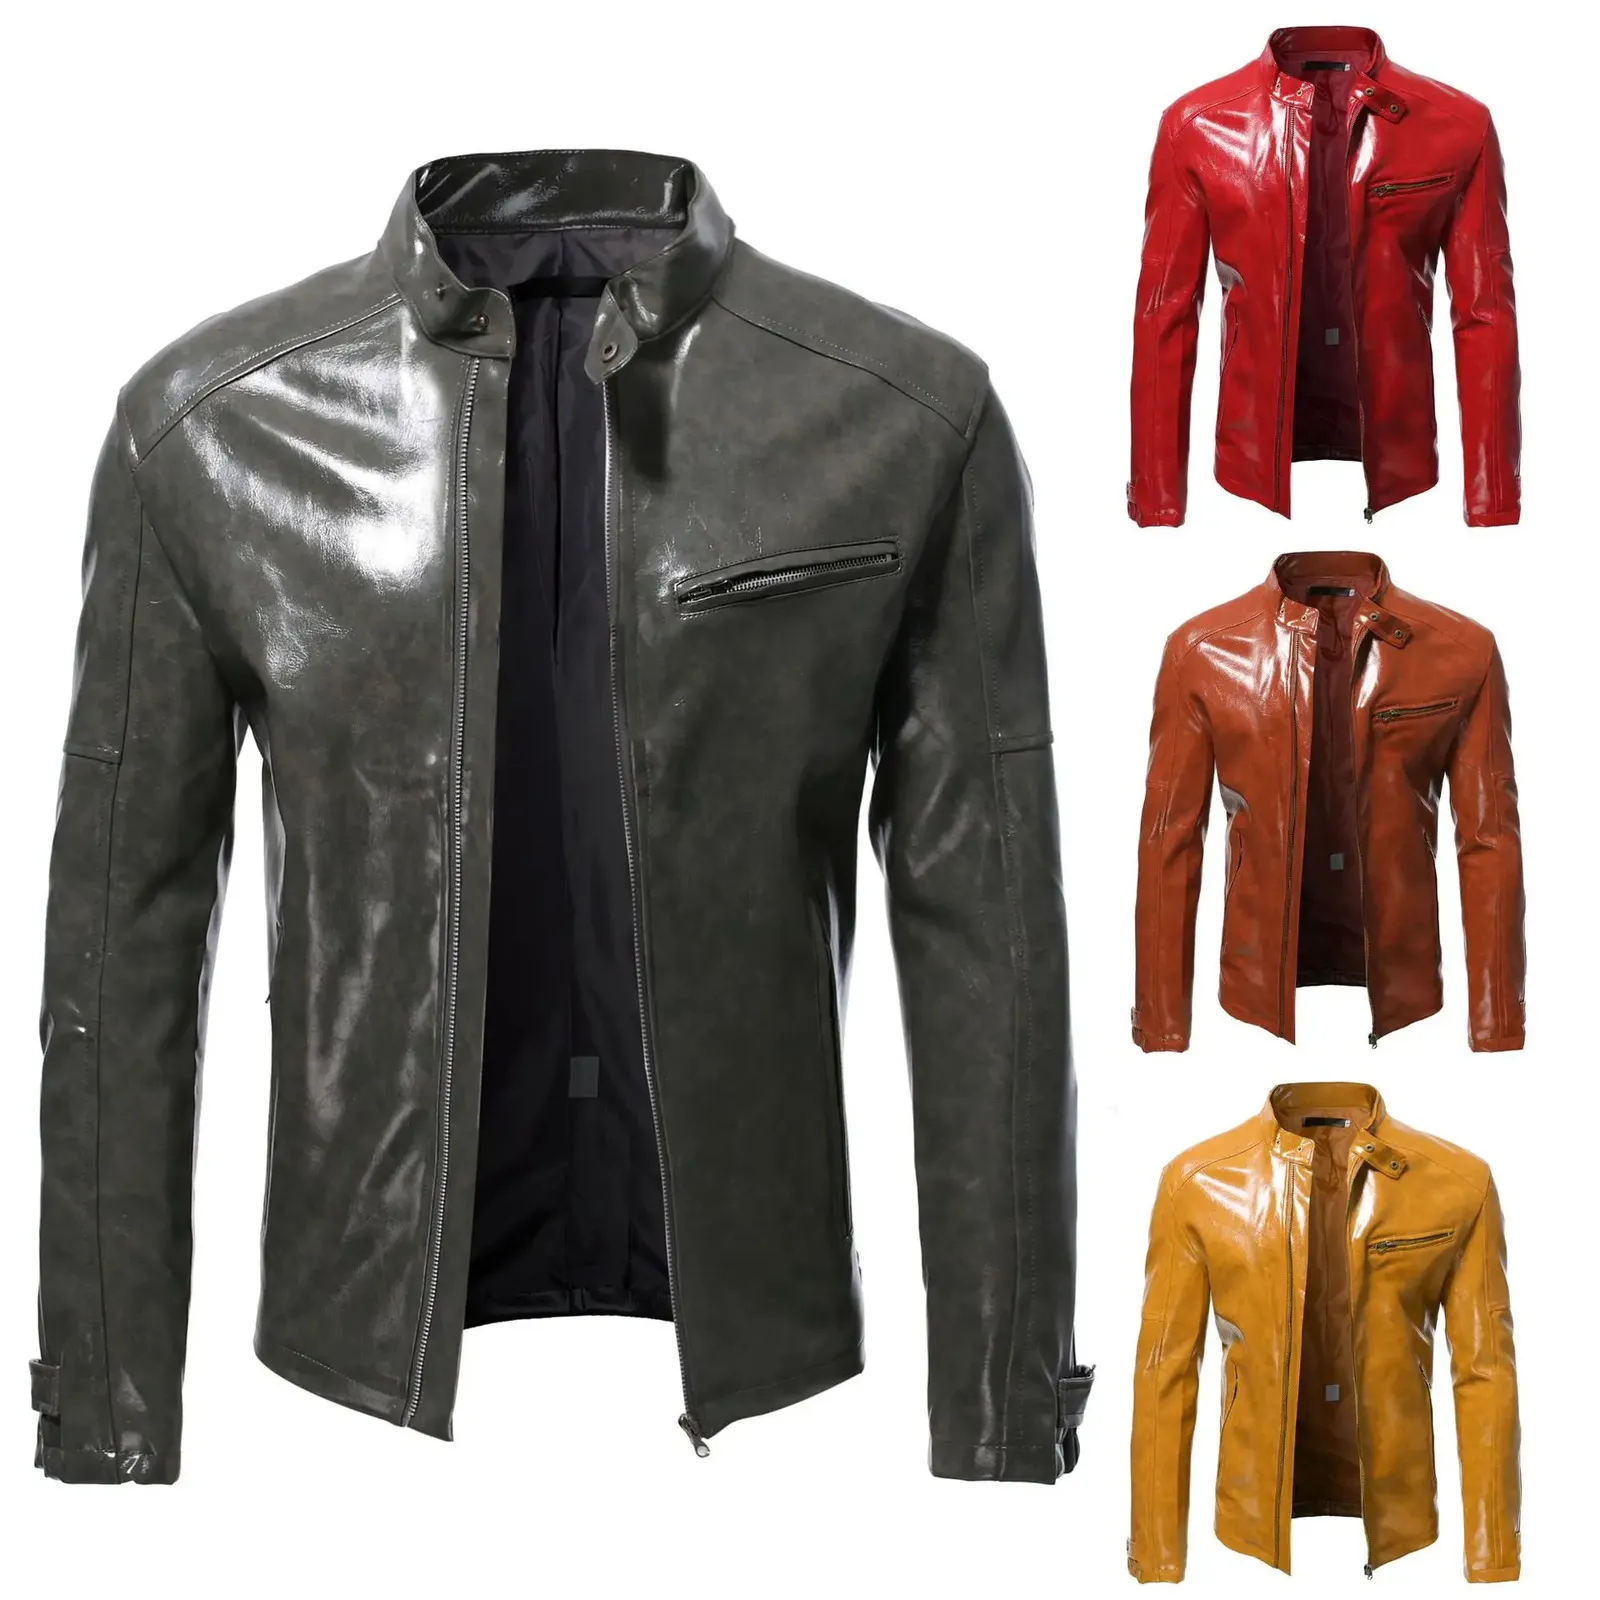 Men's Autumn Shiny Leather Jacket Fashion Self-cultivation Stand-up Collar Motorcycle Suit PU Handsome Short Top S-5XL 240106